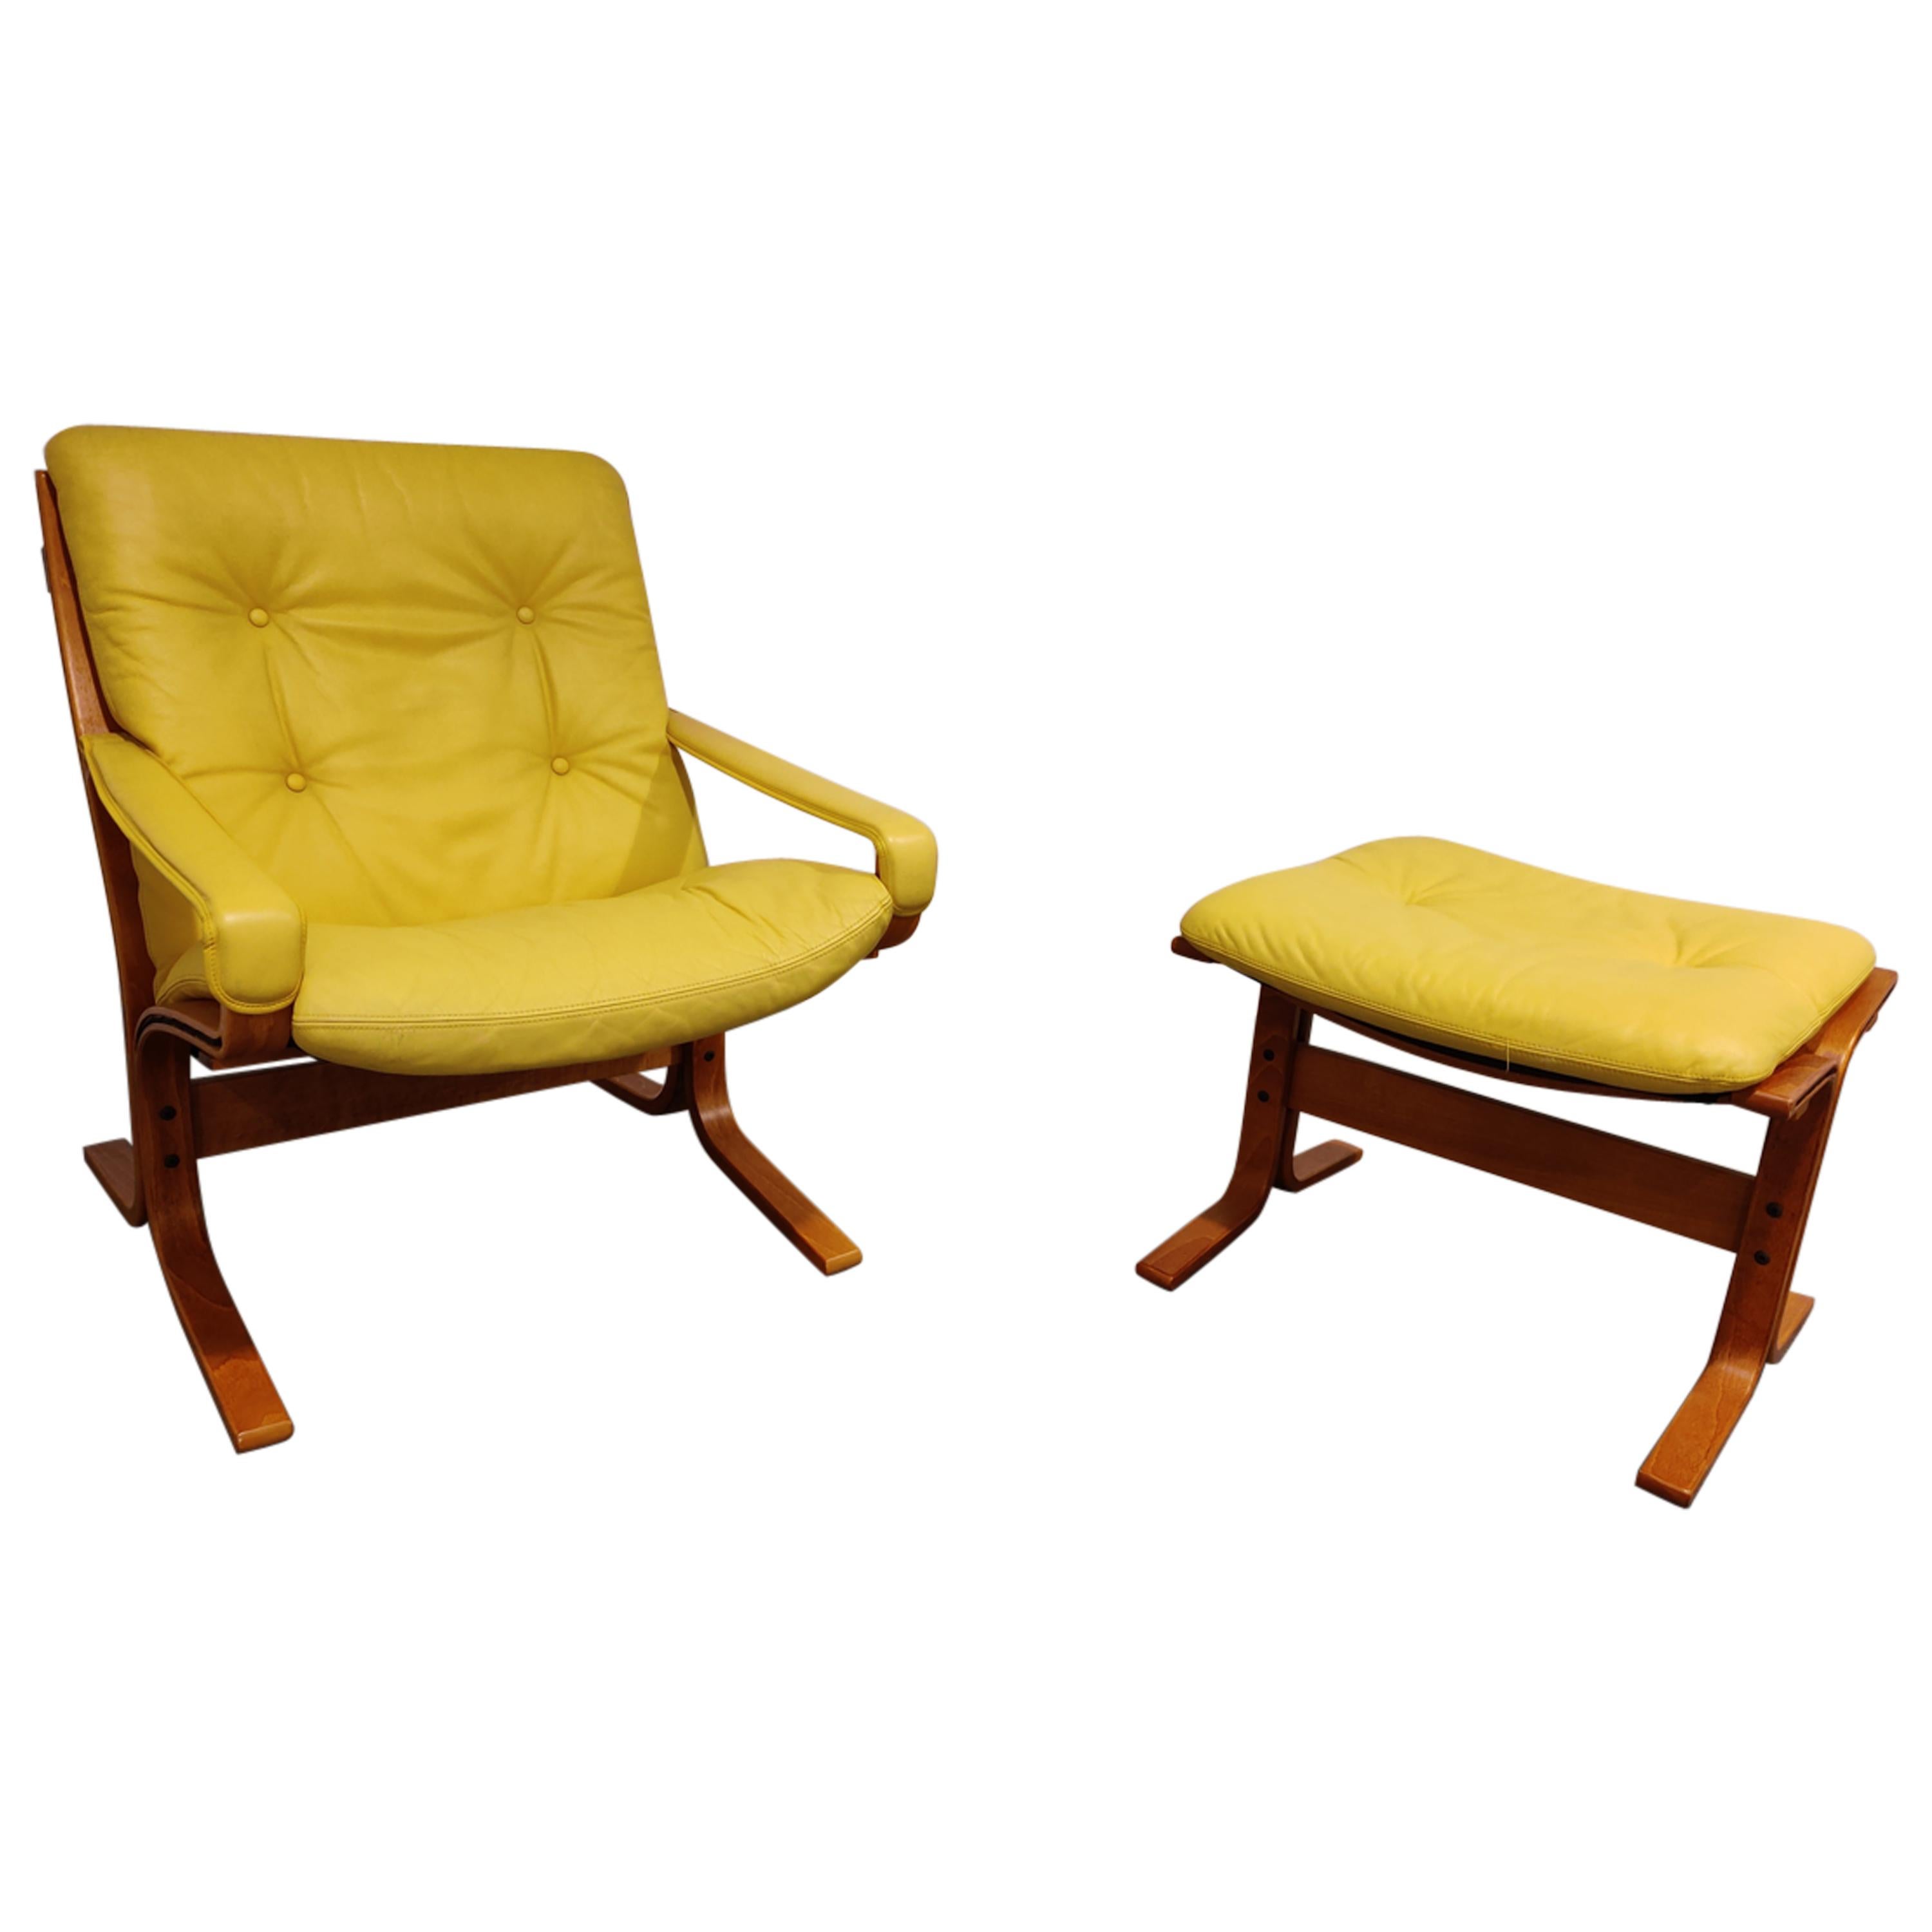 Armchair and stool by Ingmar Relling for Westnofa, 1970s